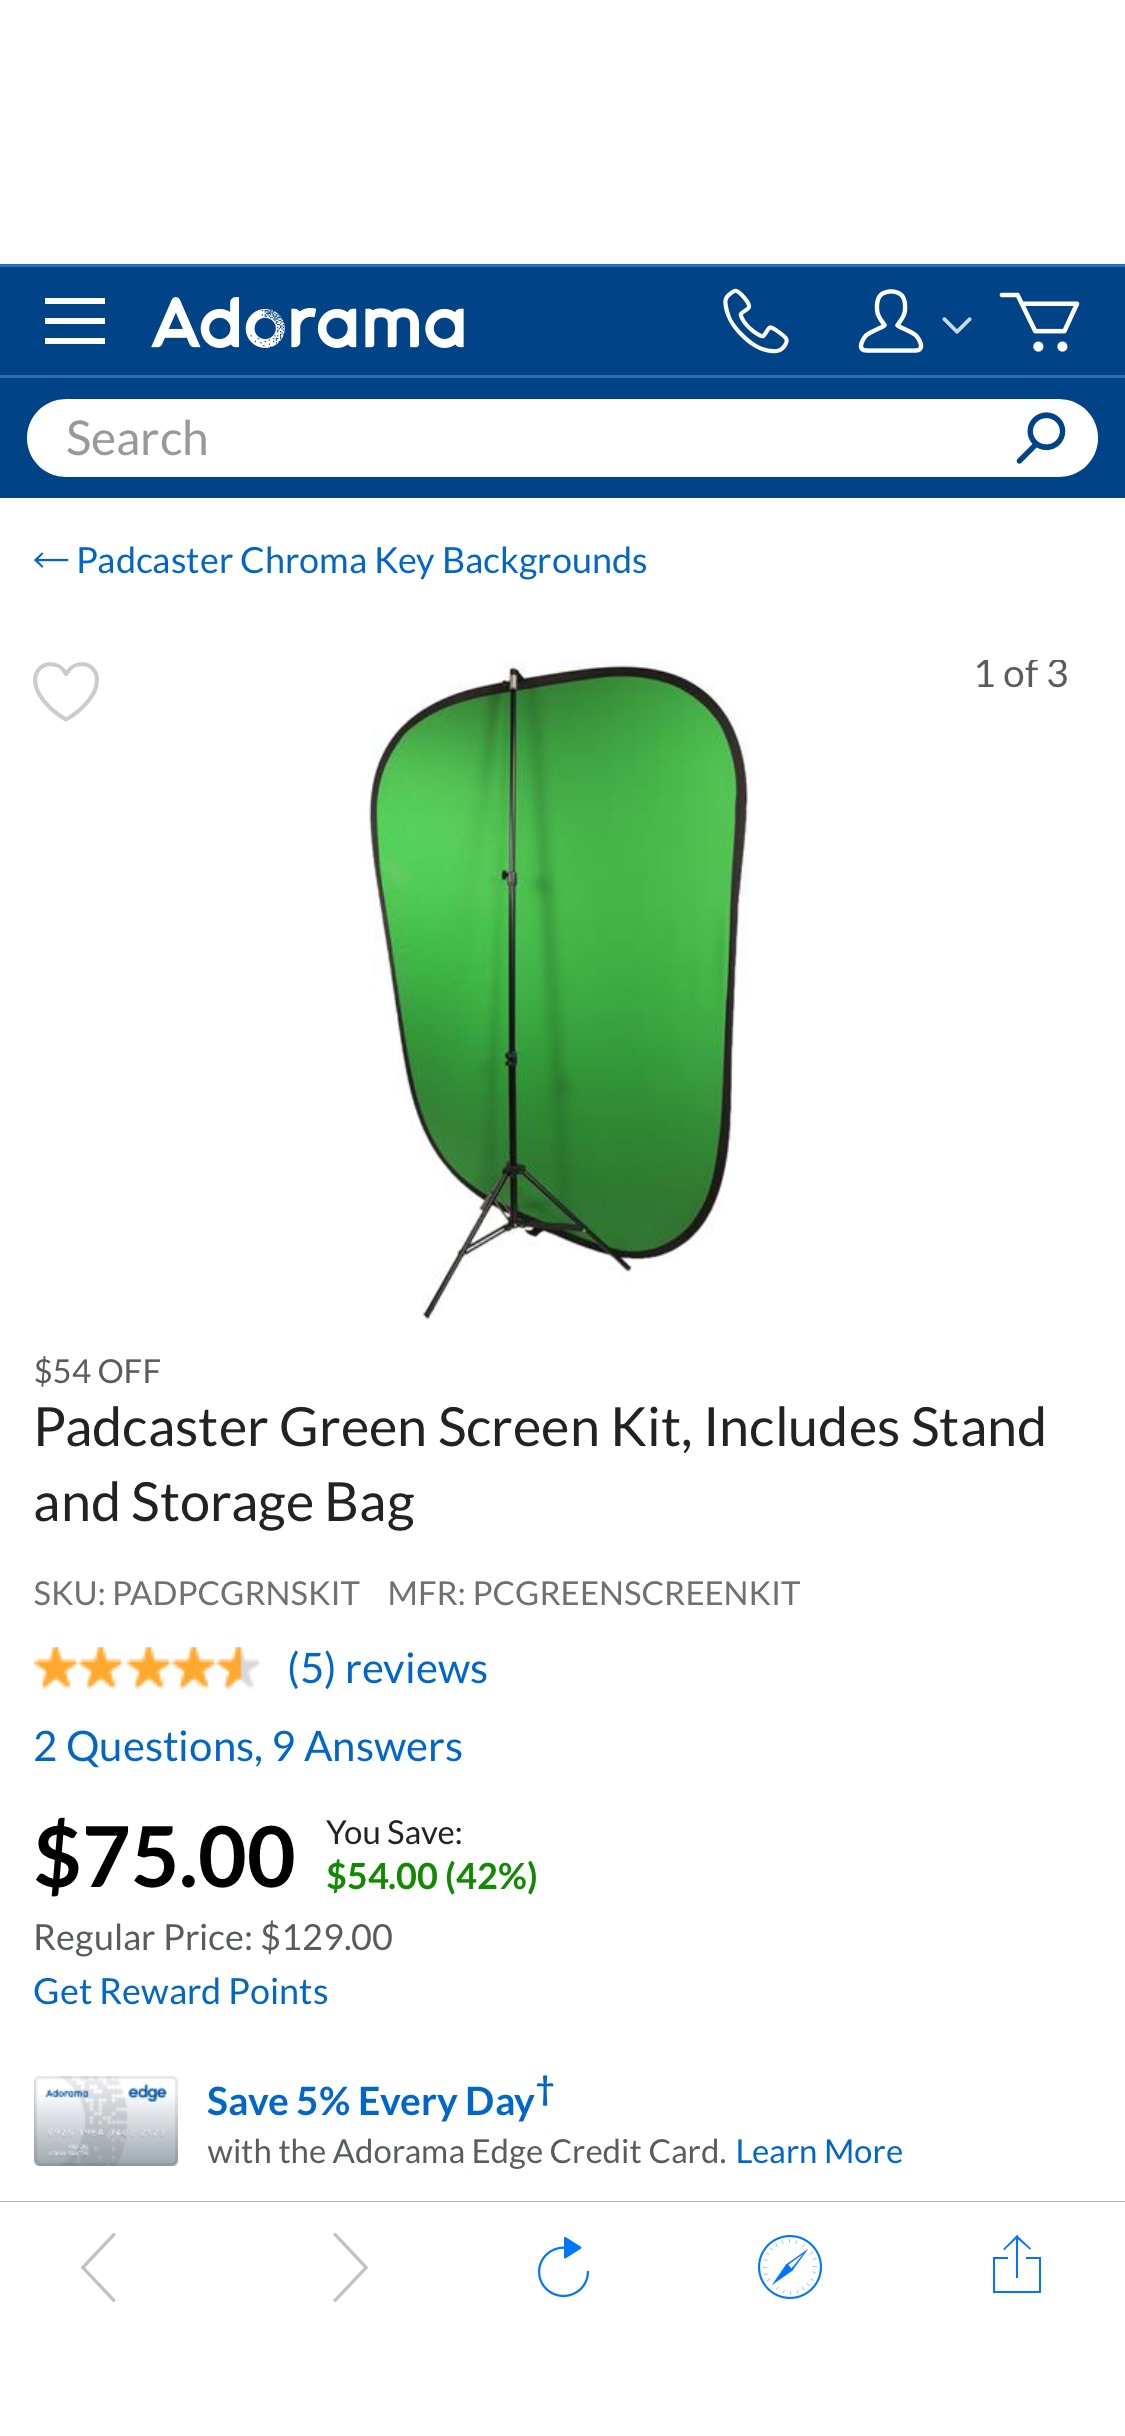 Padcaster Green Screen Kit, Includes Stand and Storage Bag PCGREENSCREENKIT 屏幕设备